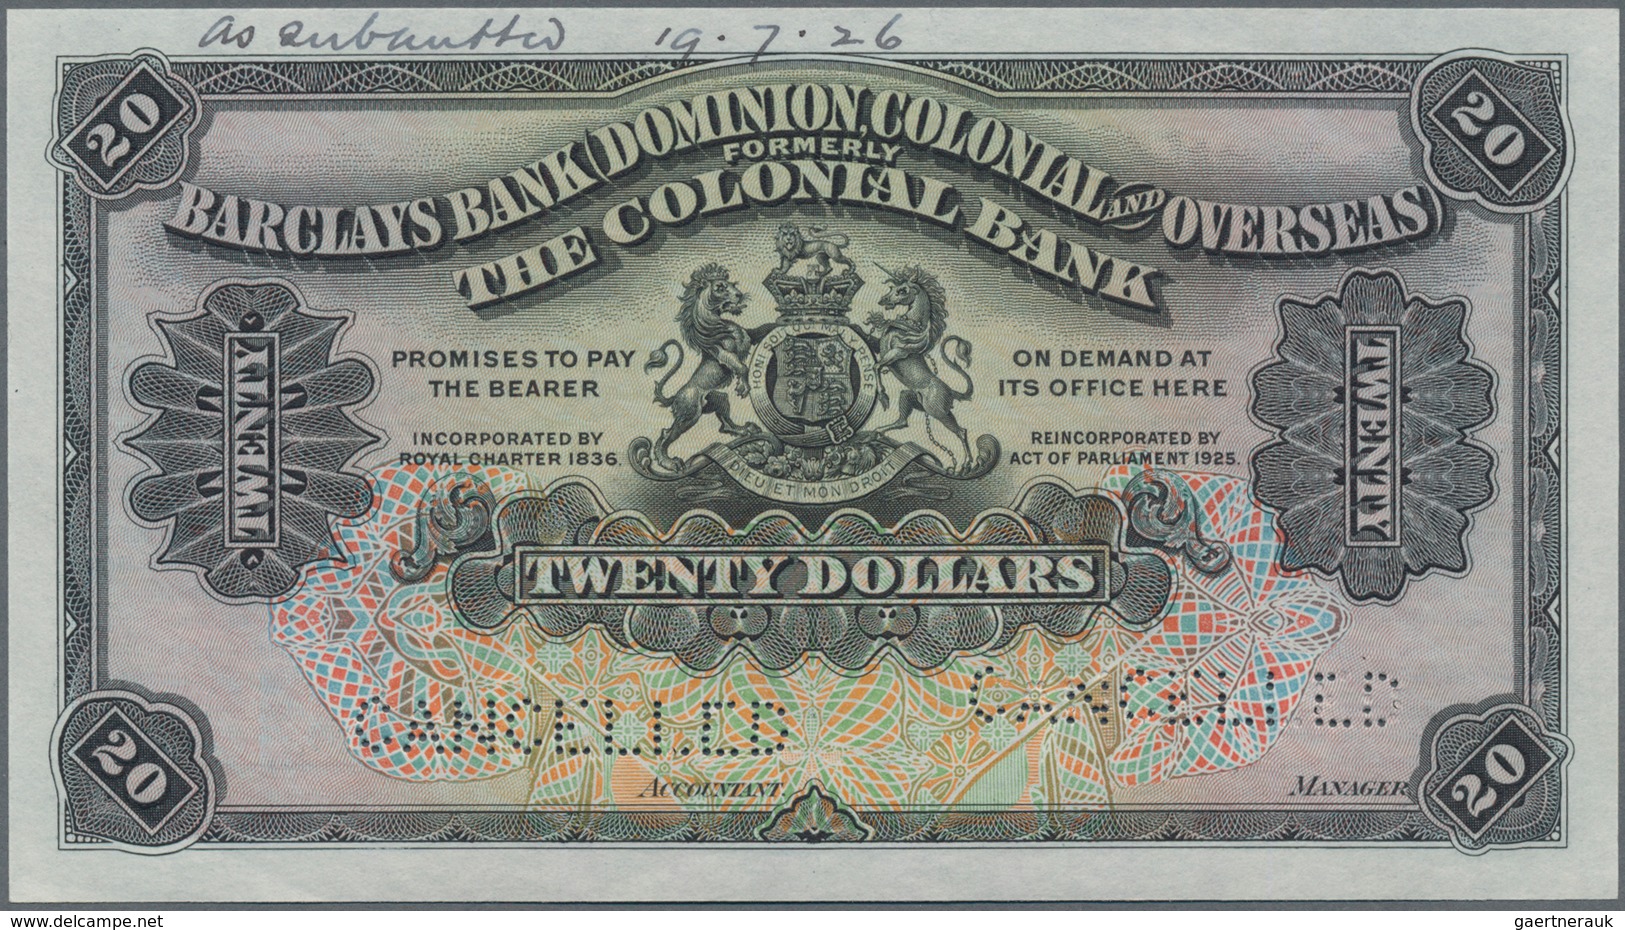 Barbados: Barclays Bank (Dominion, Colonial And Overseas) Formerly The Colonial Bank 20 Dollars 1920 - Barbados